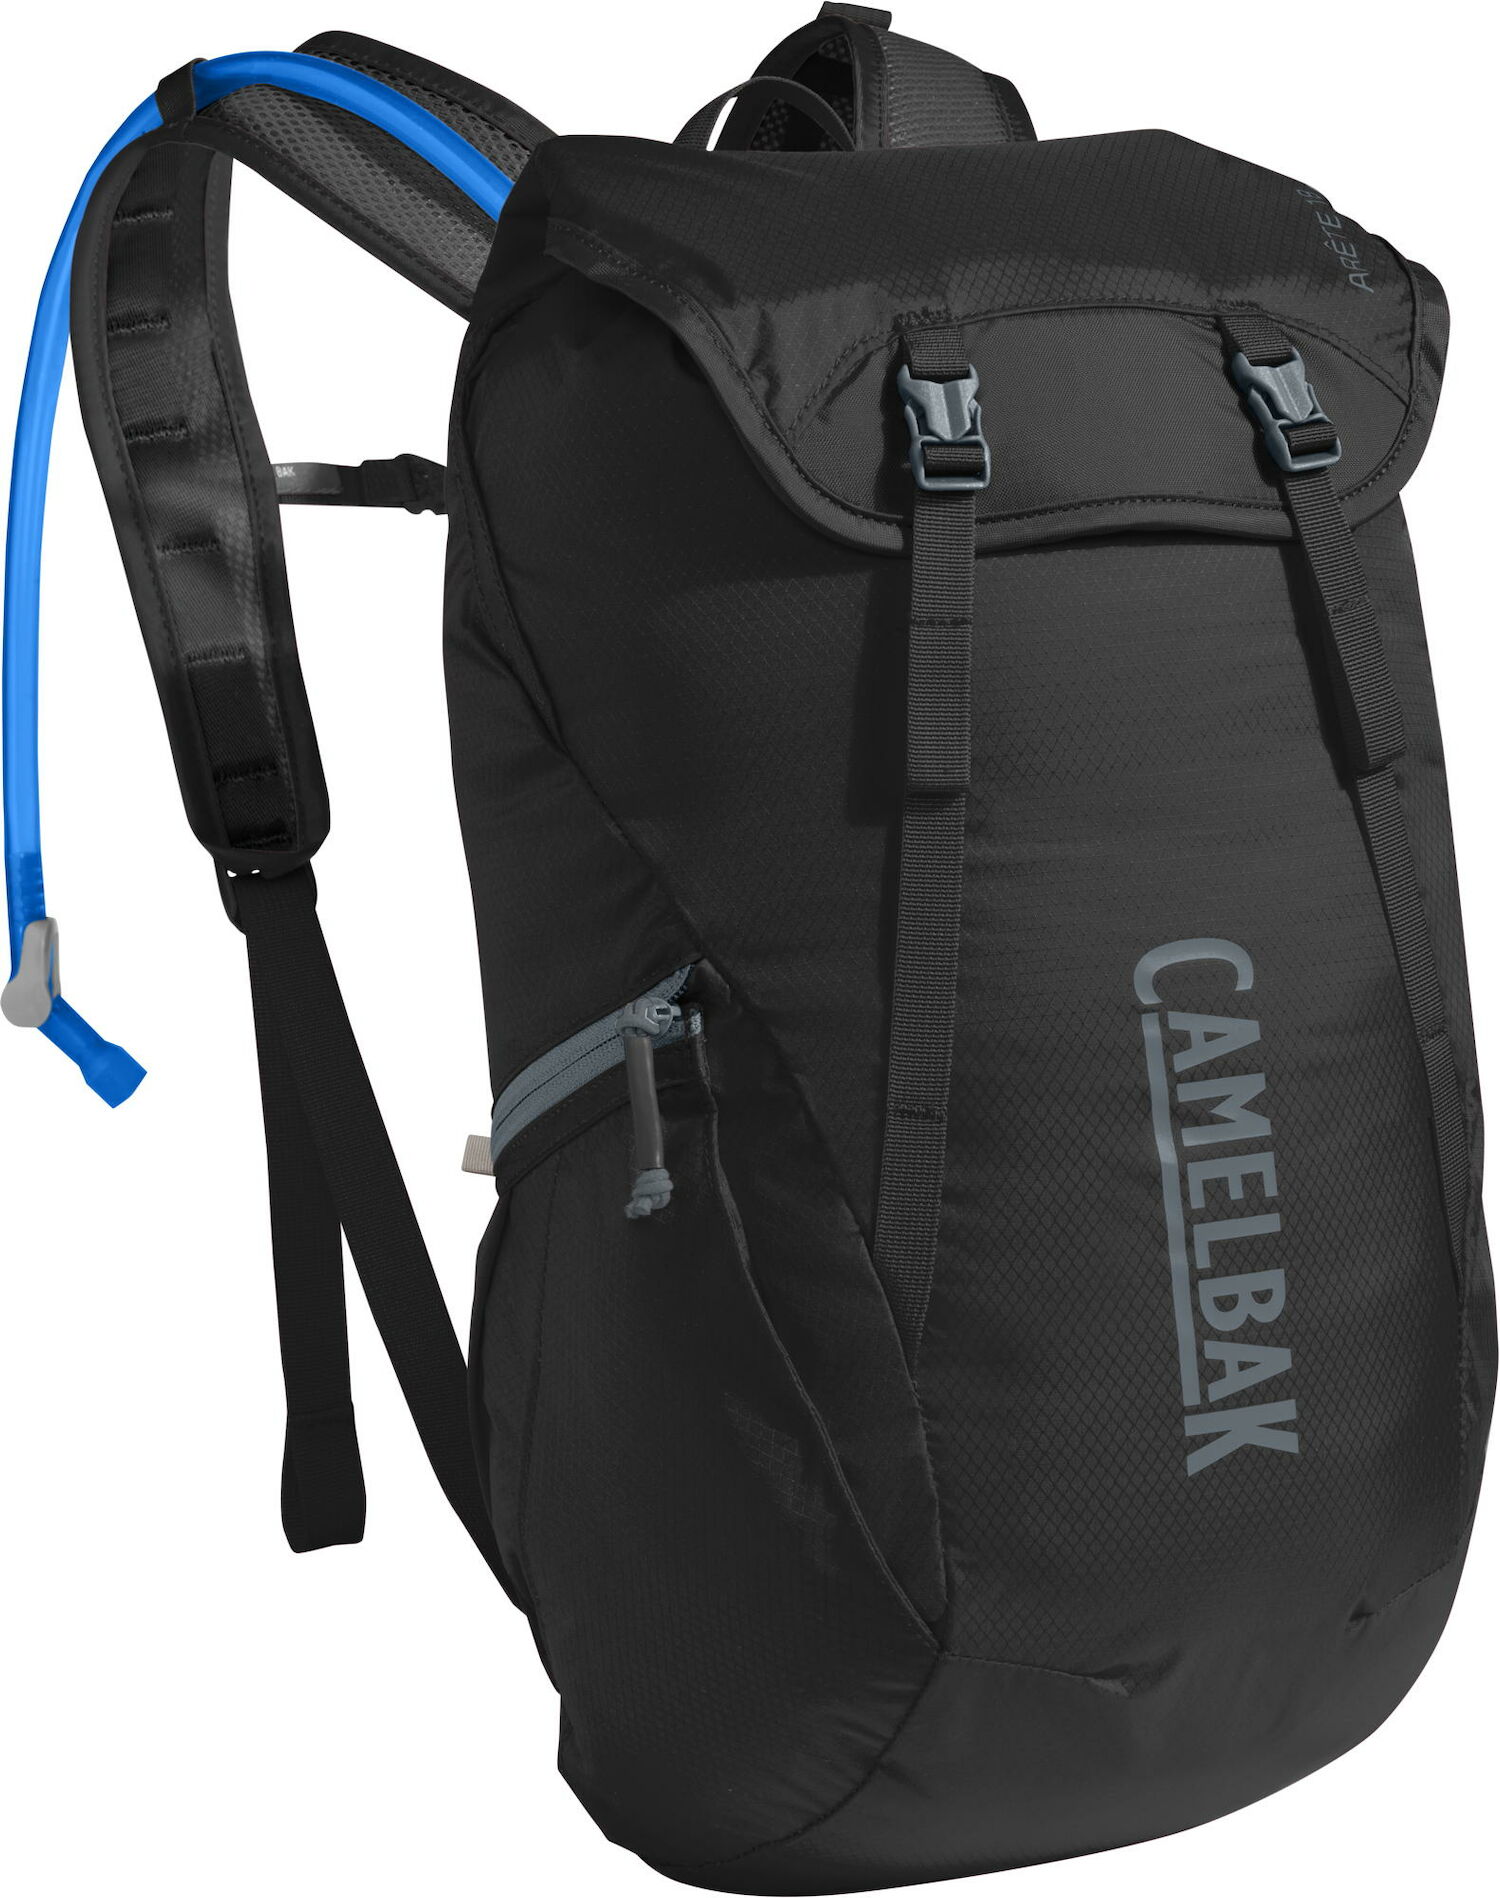 Arete 18 Hydration Pack